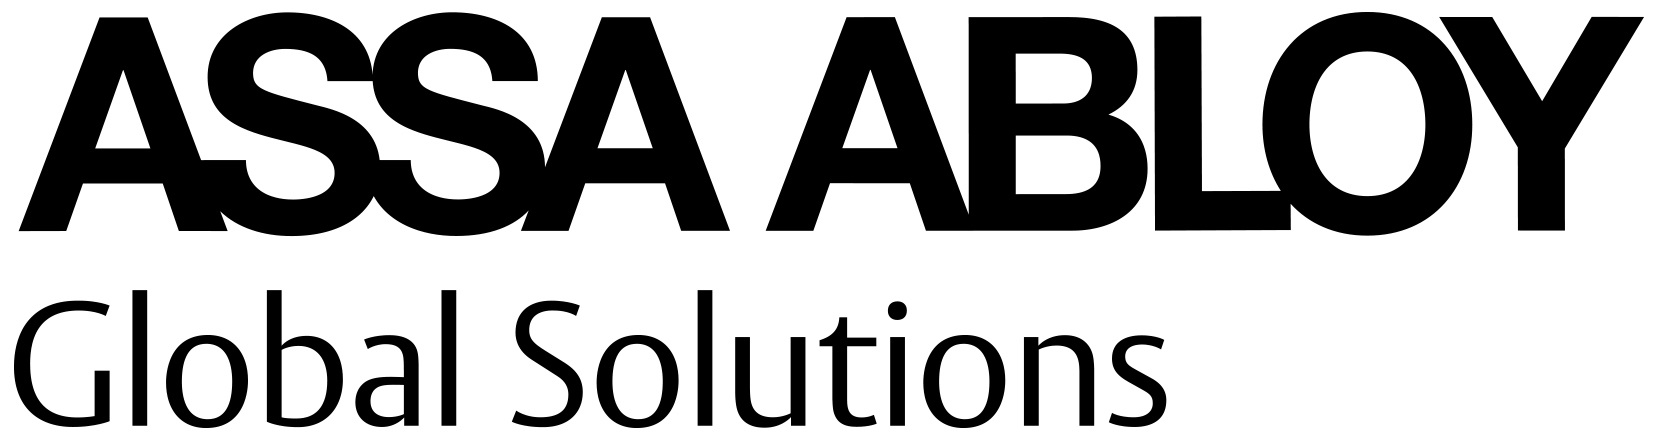 ASSA ABLOY Global Solutions Benelux B.V.